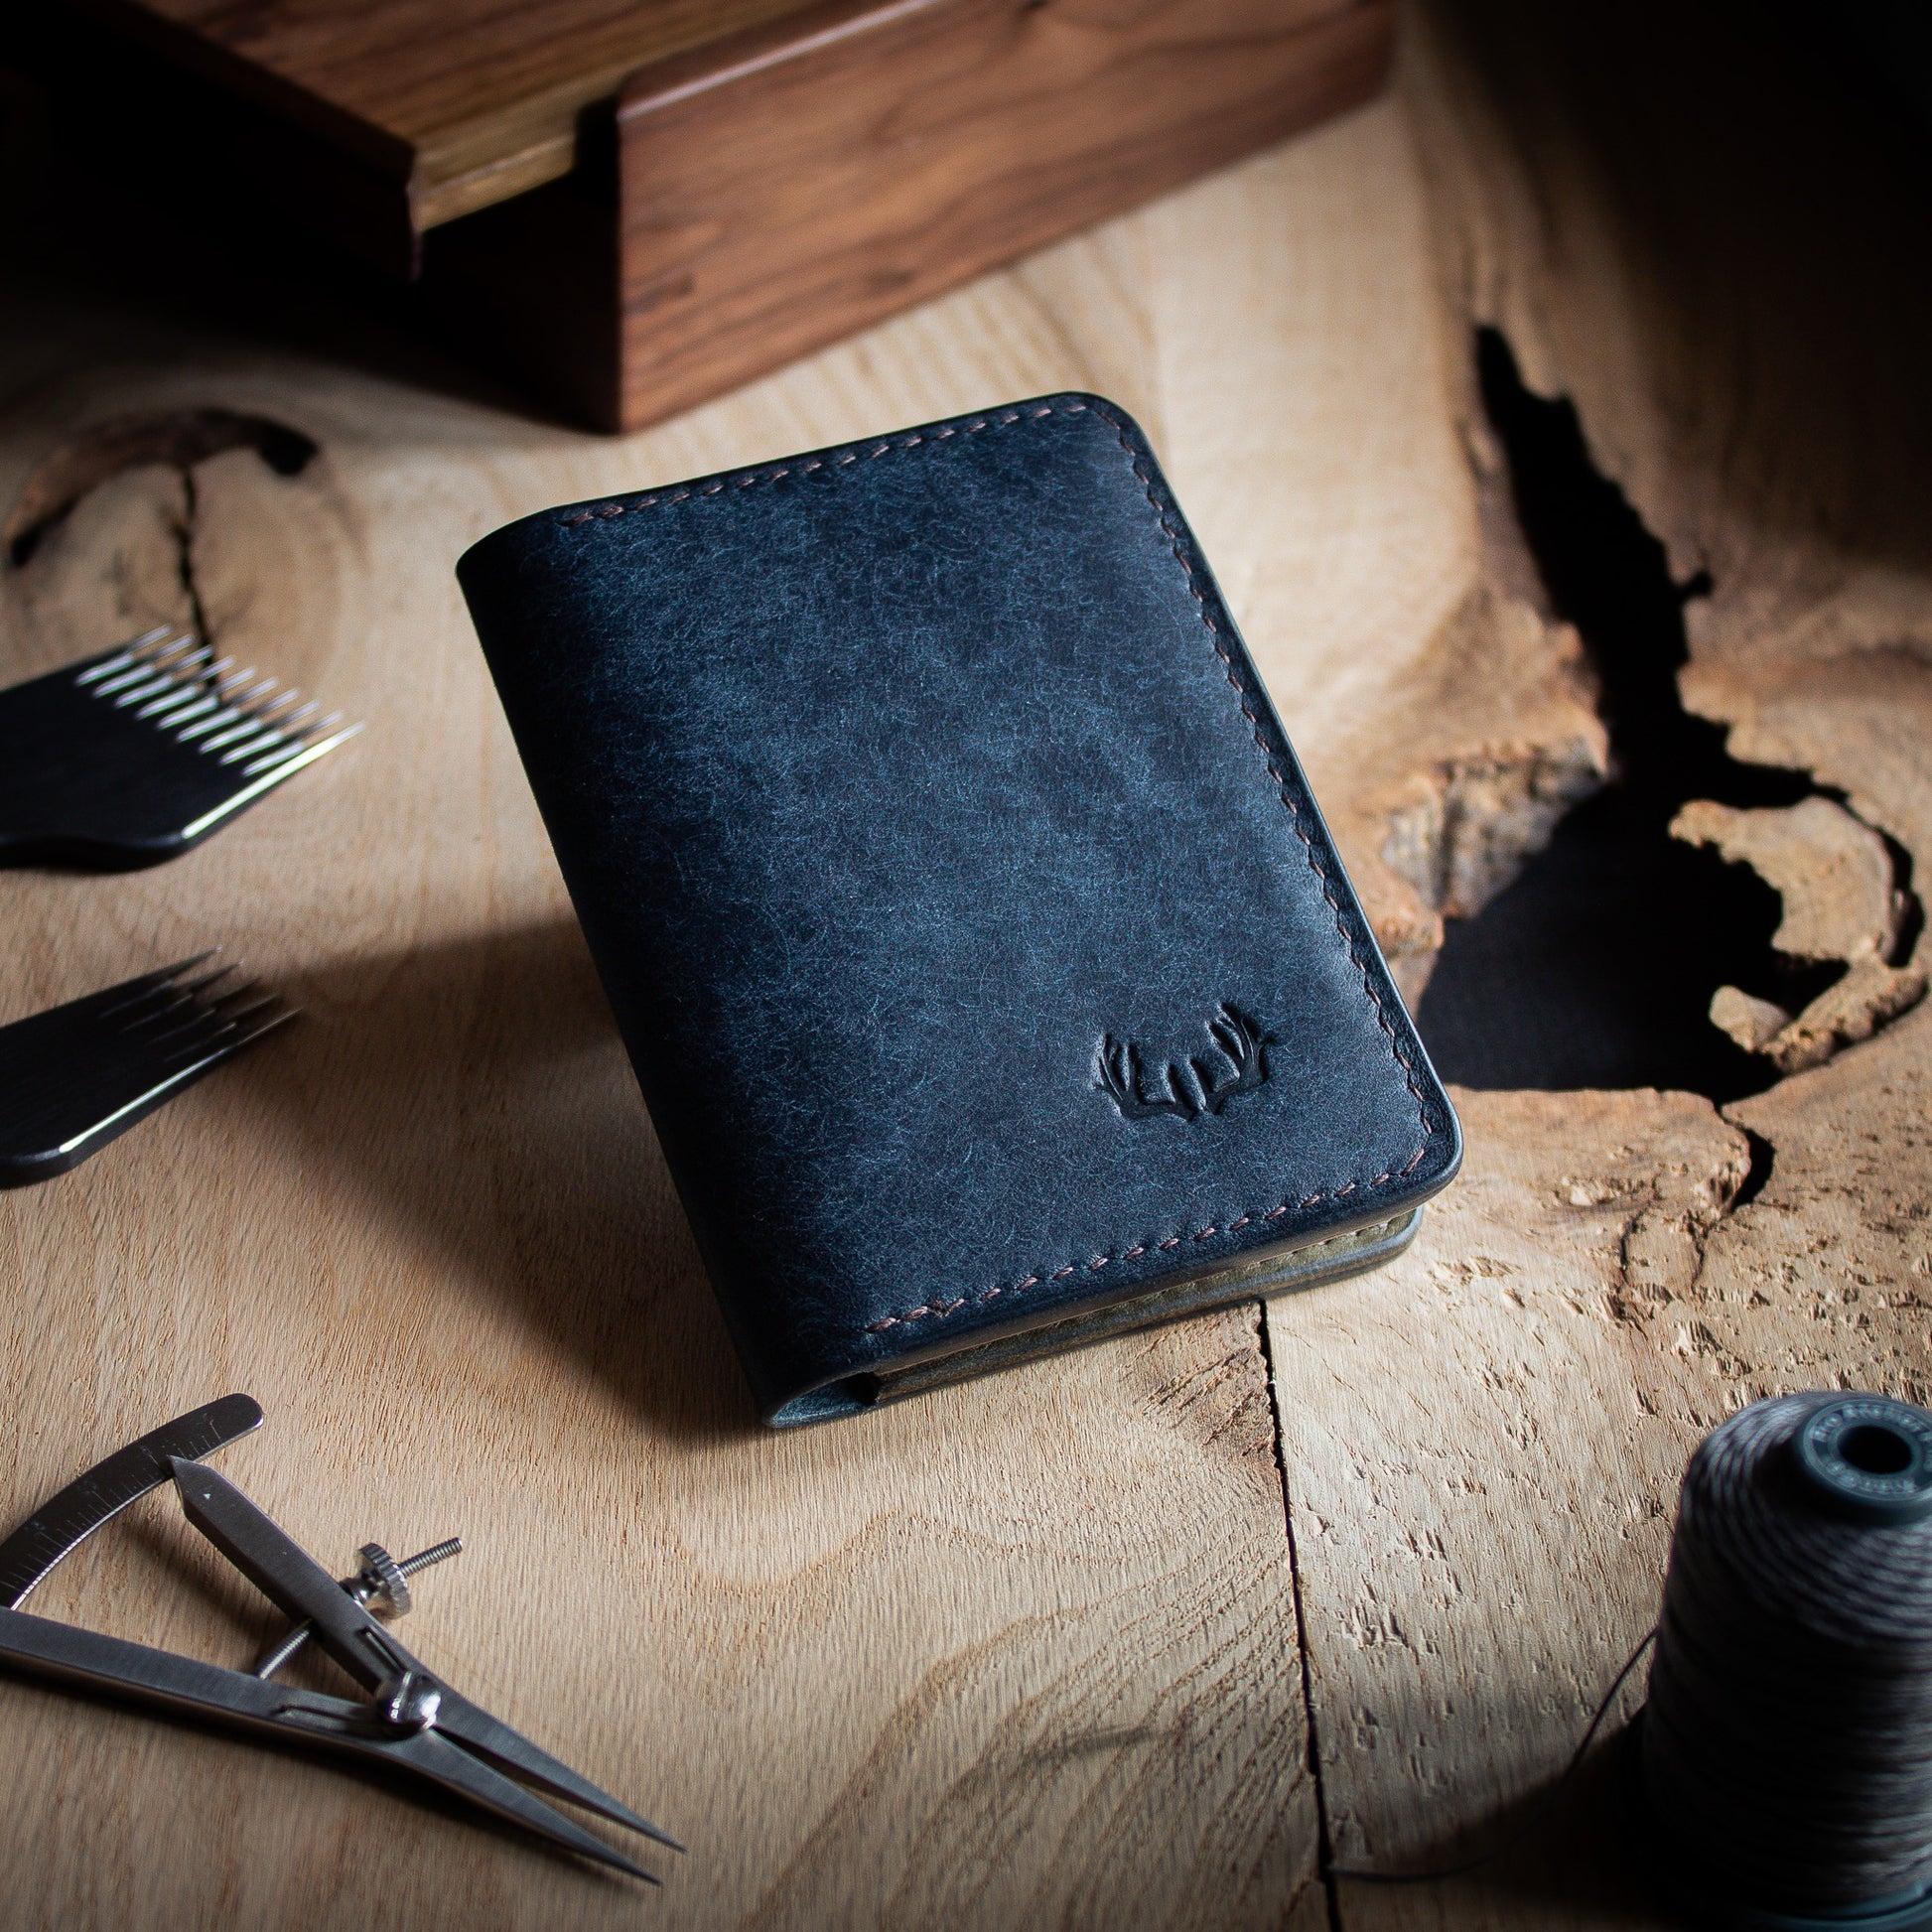  handcrafted Navy leather wallet with antlers logo, surrounded by leathercraft tools on wooden table closed